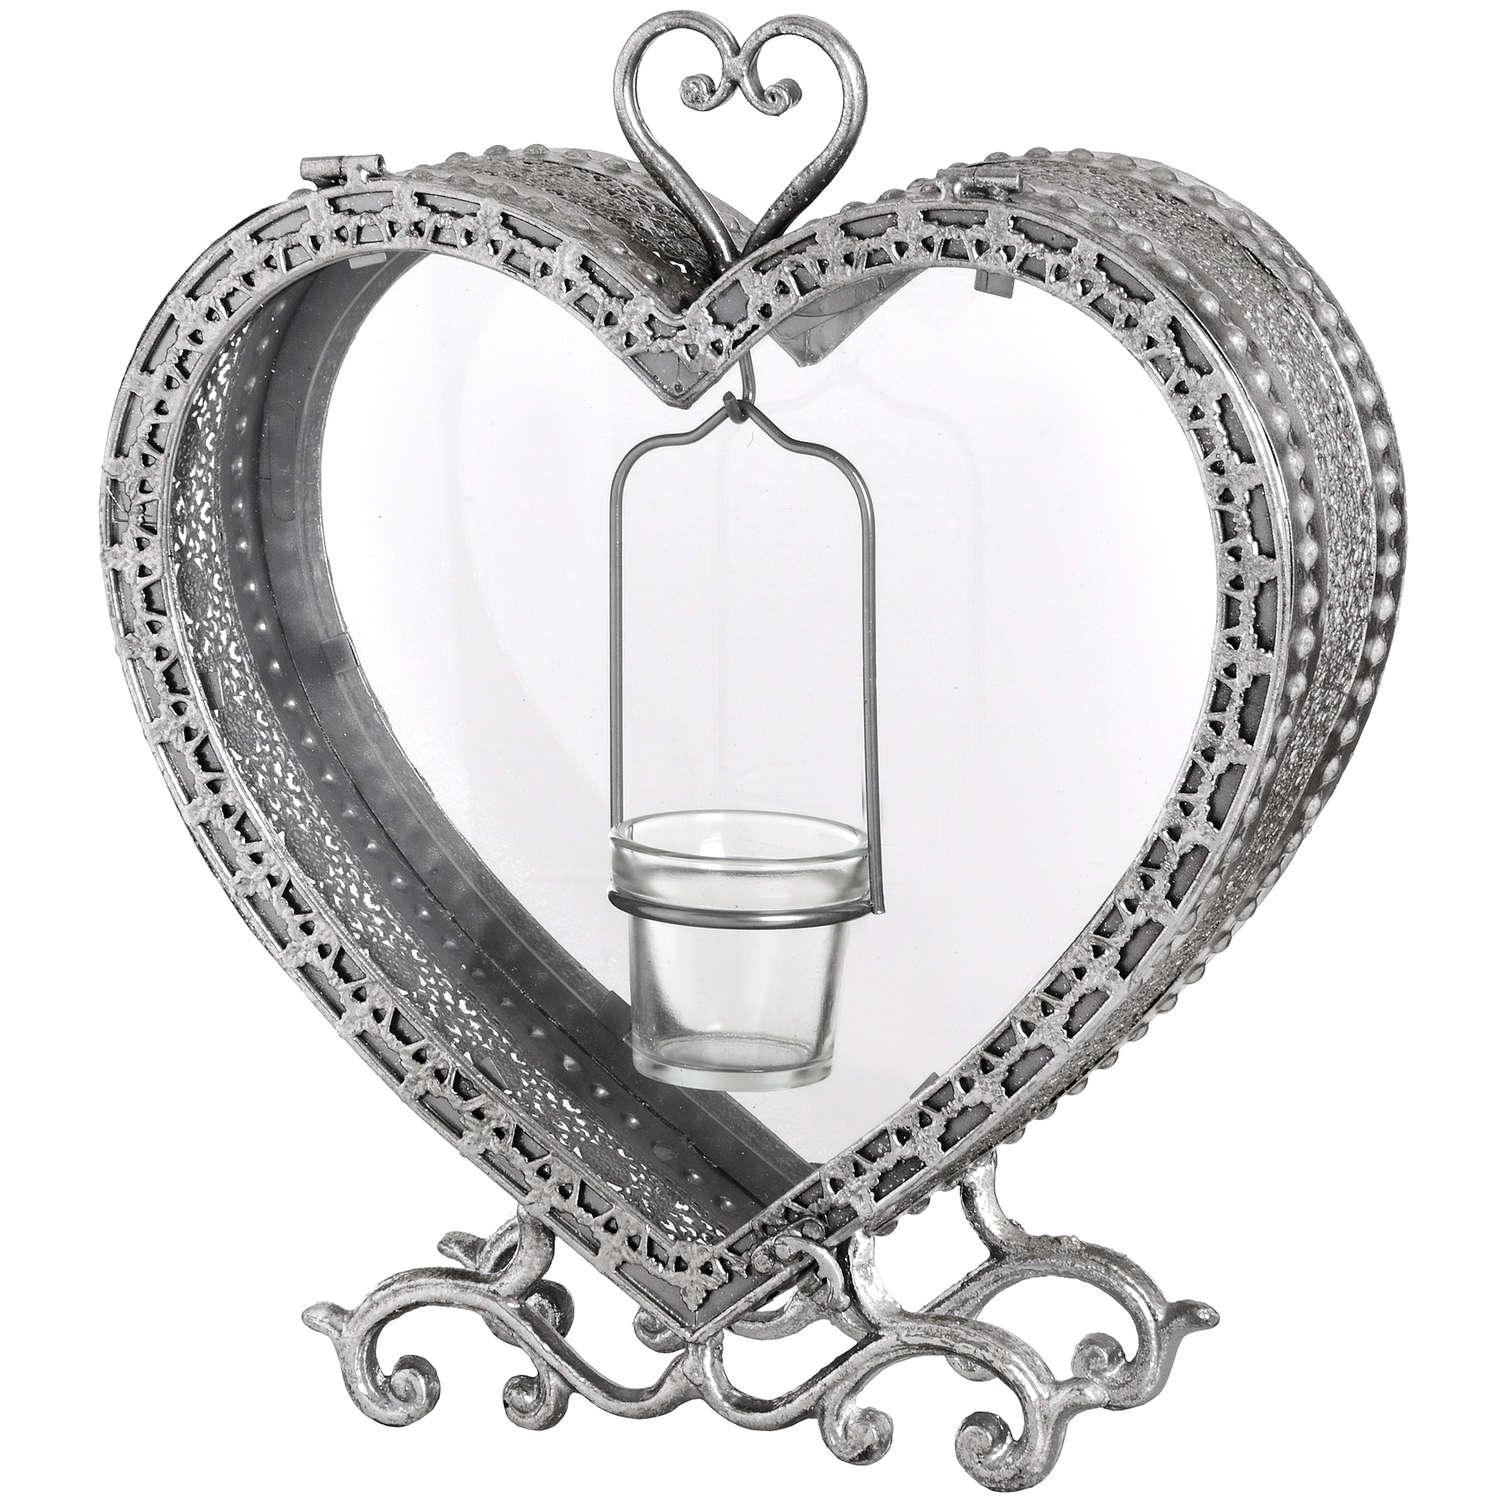 Free Standing Heart Tealight Lantern in Antique Silver - Vookoo Lifestyle